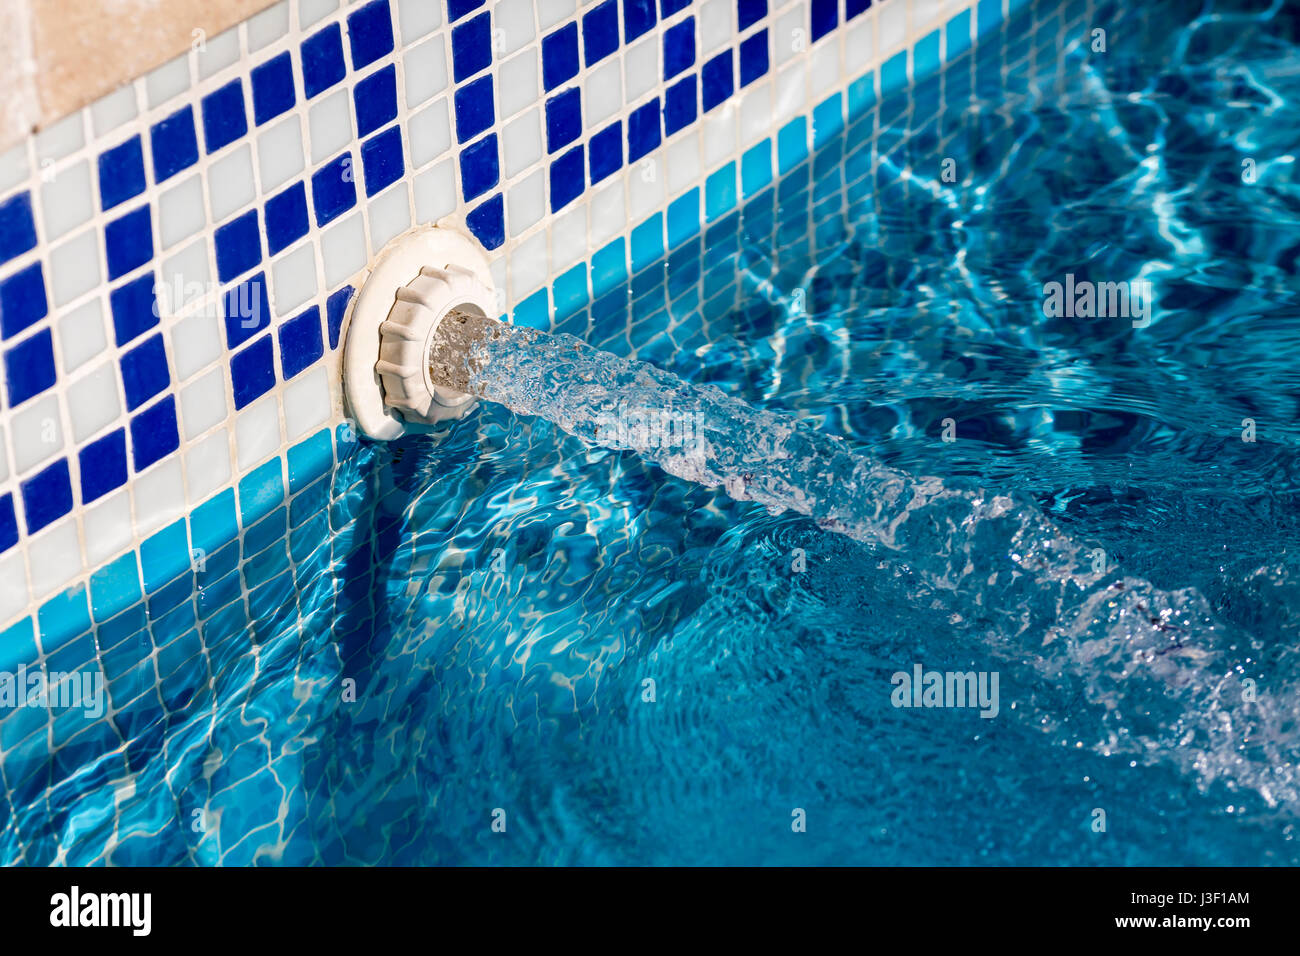 Detail view of a inflowing water jet into a swimming pool with blue tiles  Stock Photo - Alamy